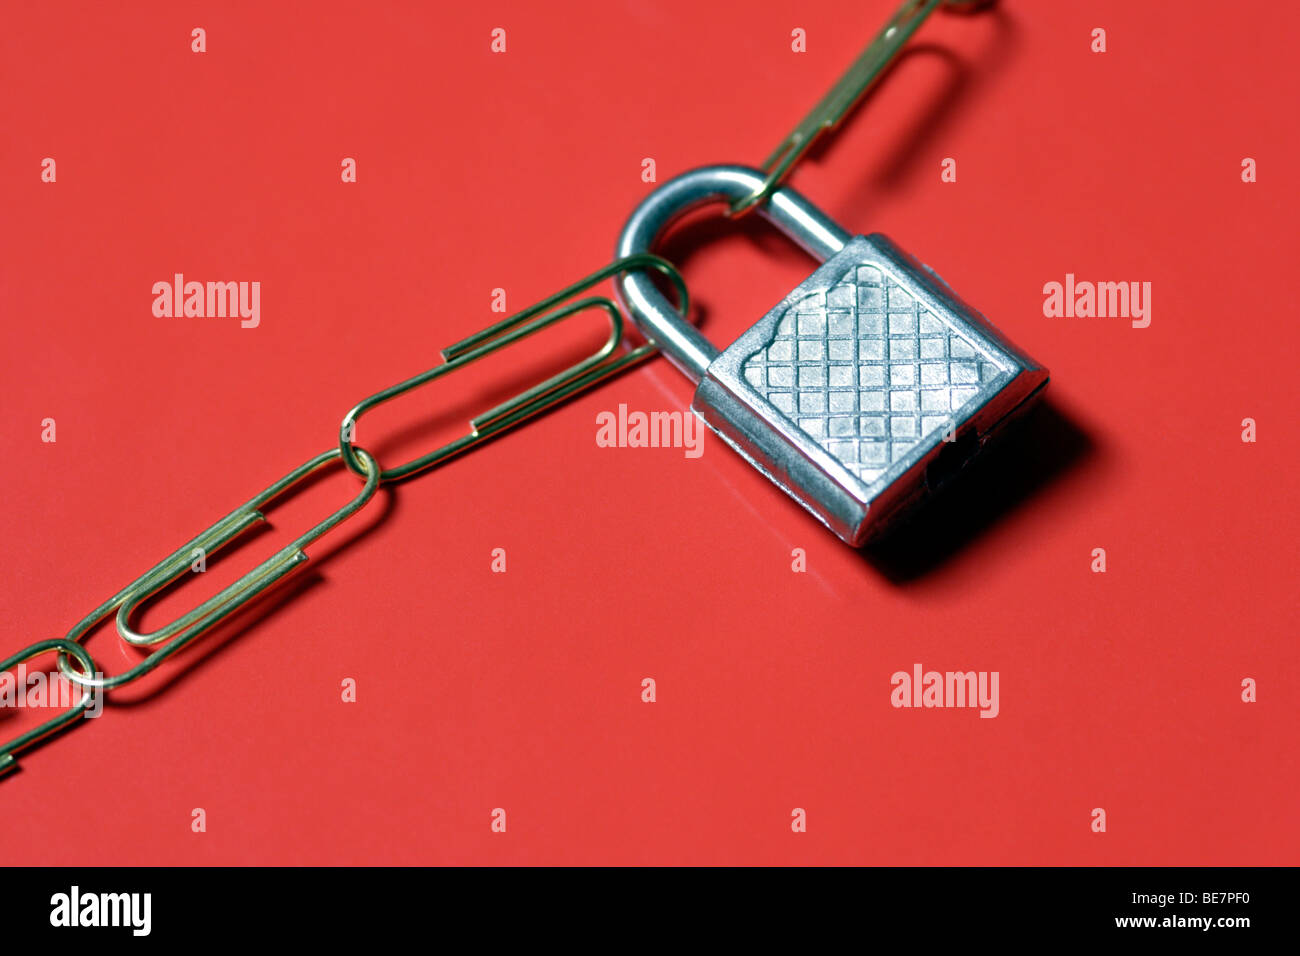 Padlock connecting paperclip chain close up Stock Photo